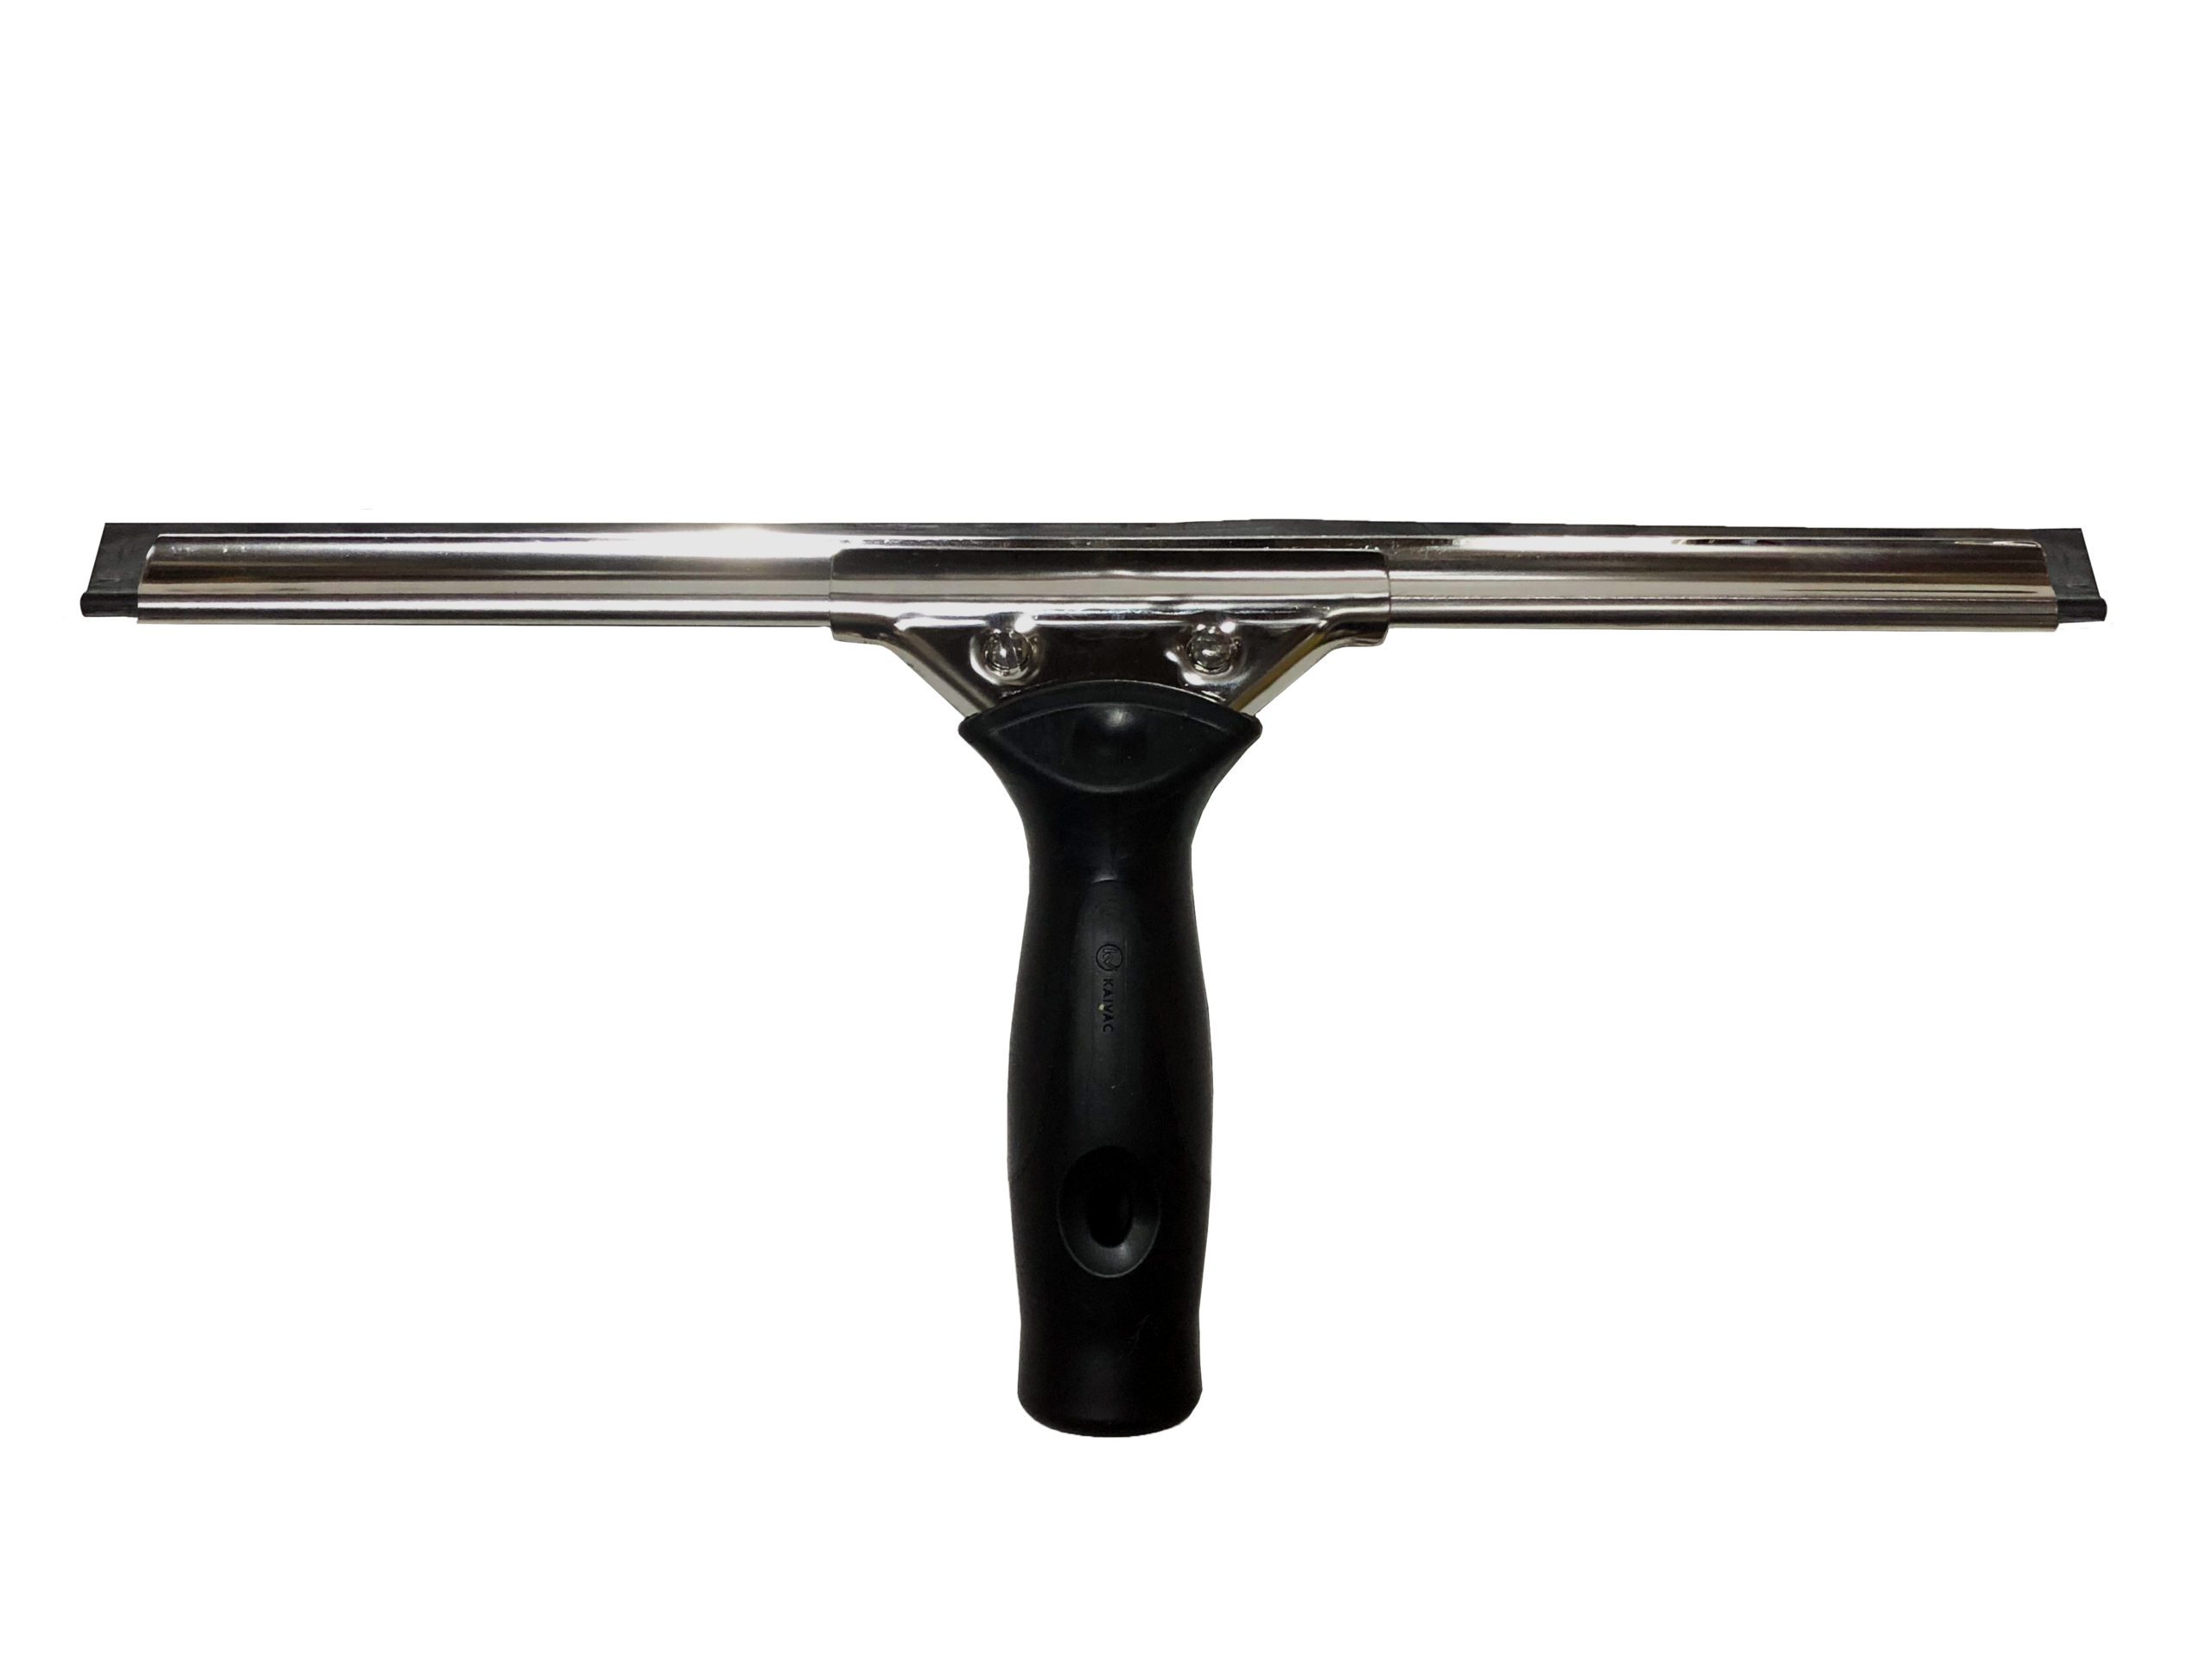 Window Squeegee And Handle Assembly - Kaivac, Inc.